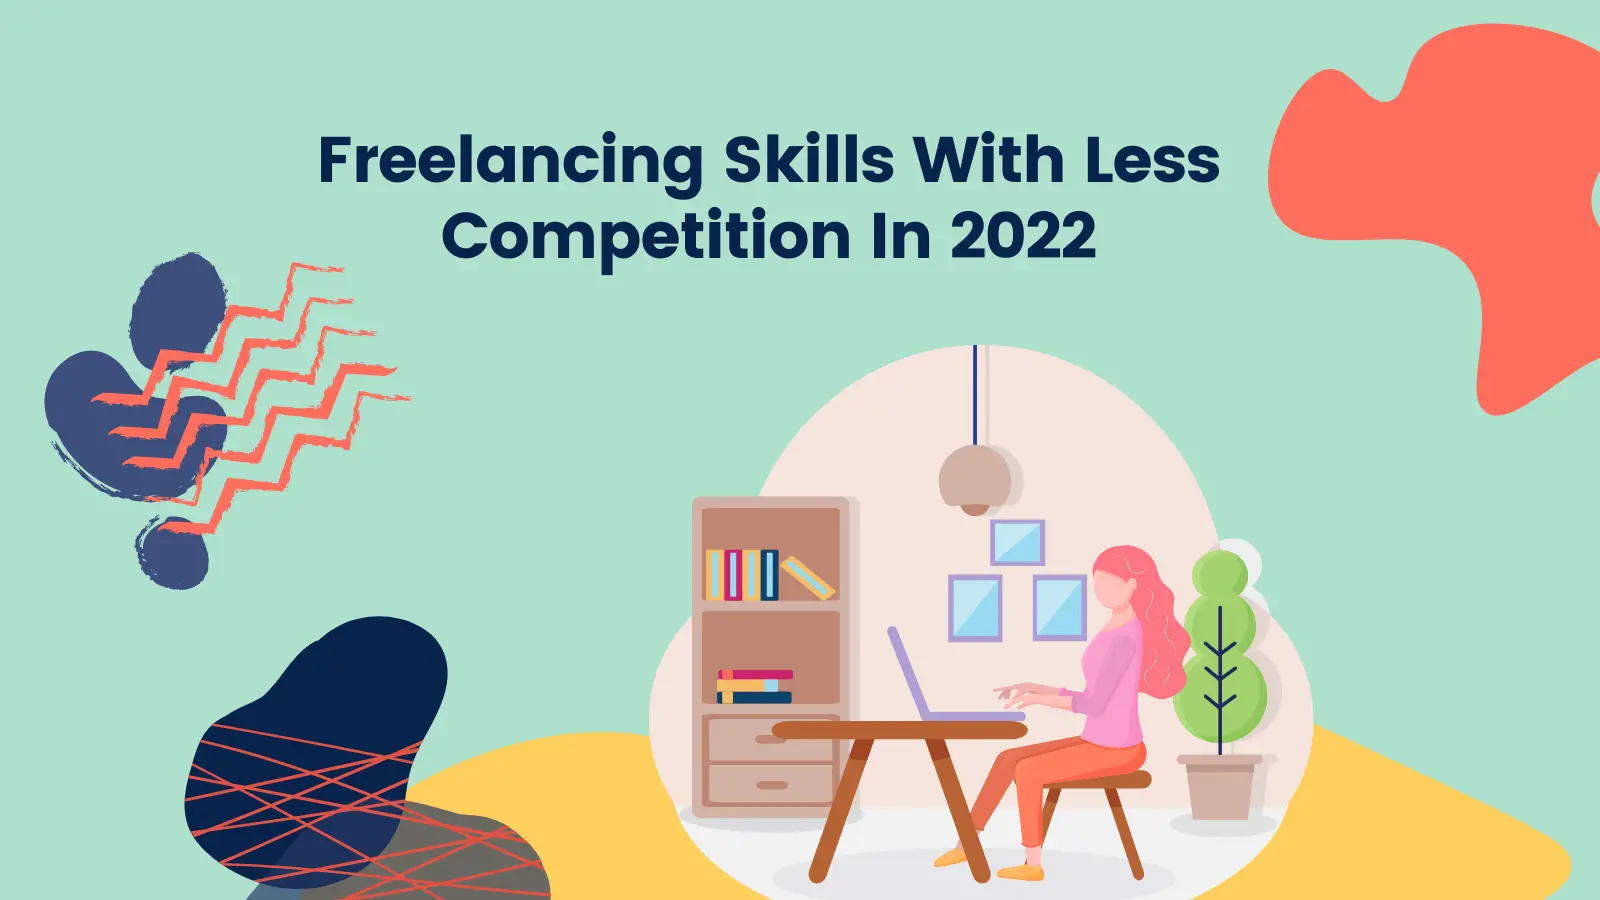 Freelancing Skills With Less Competition In 2022